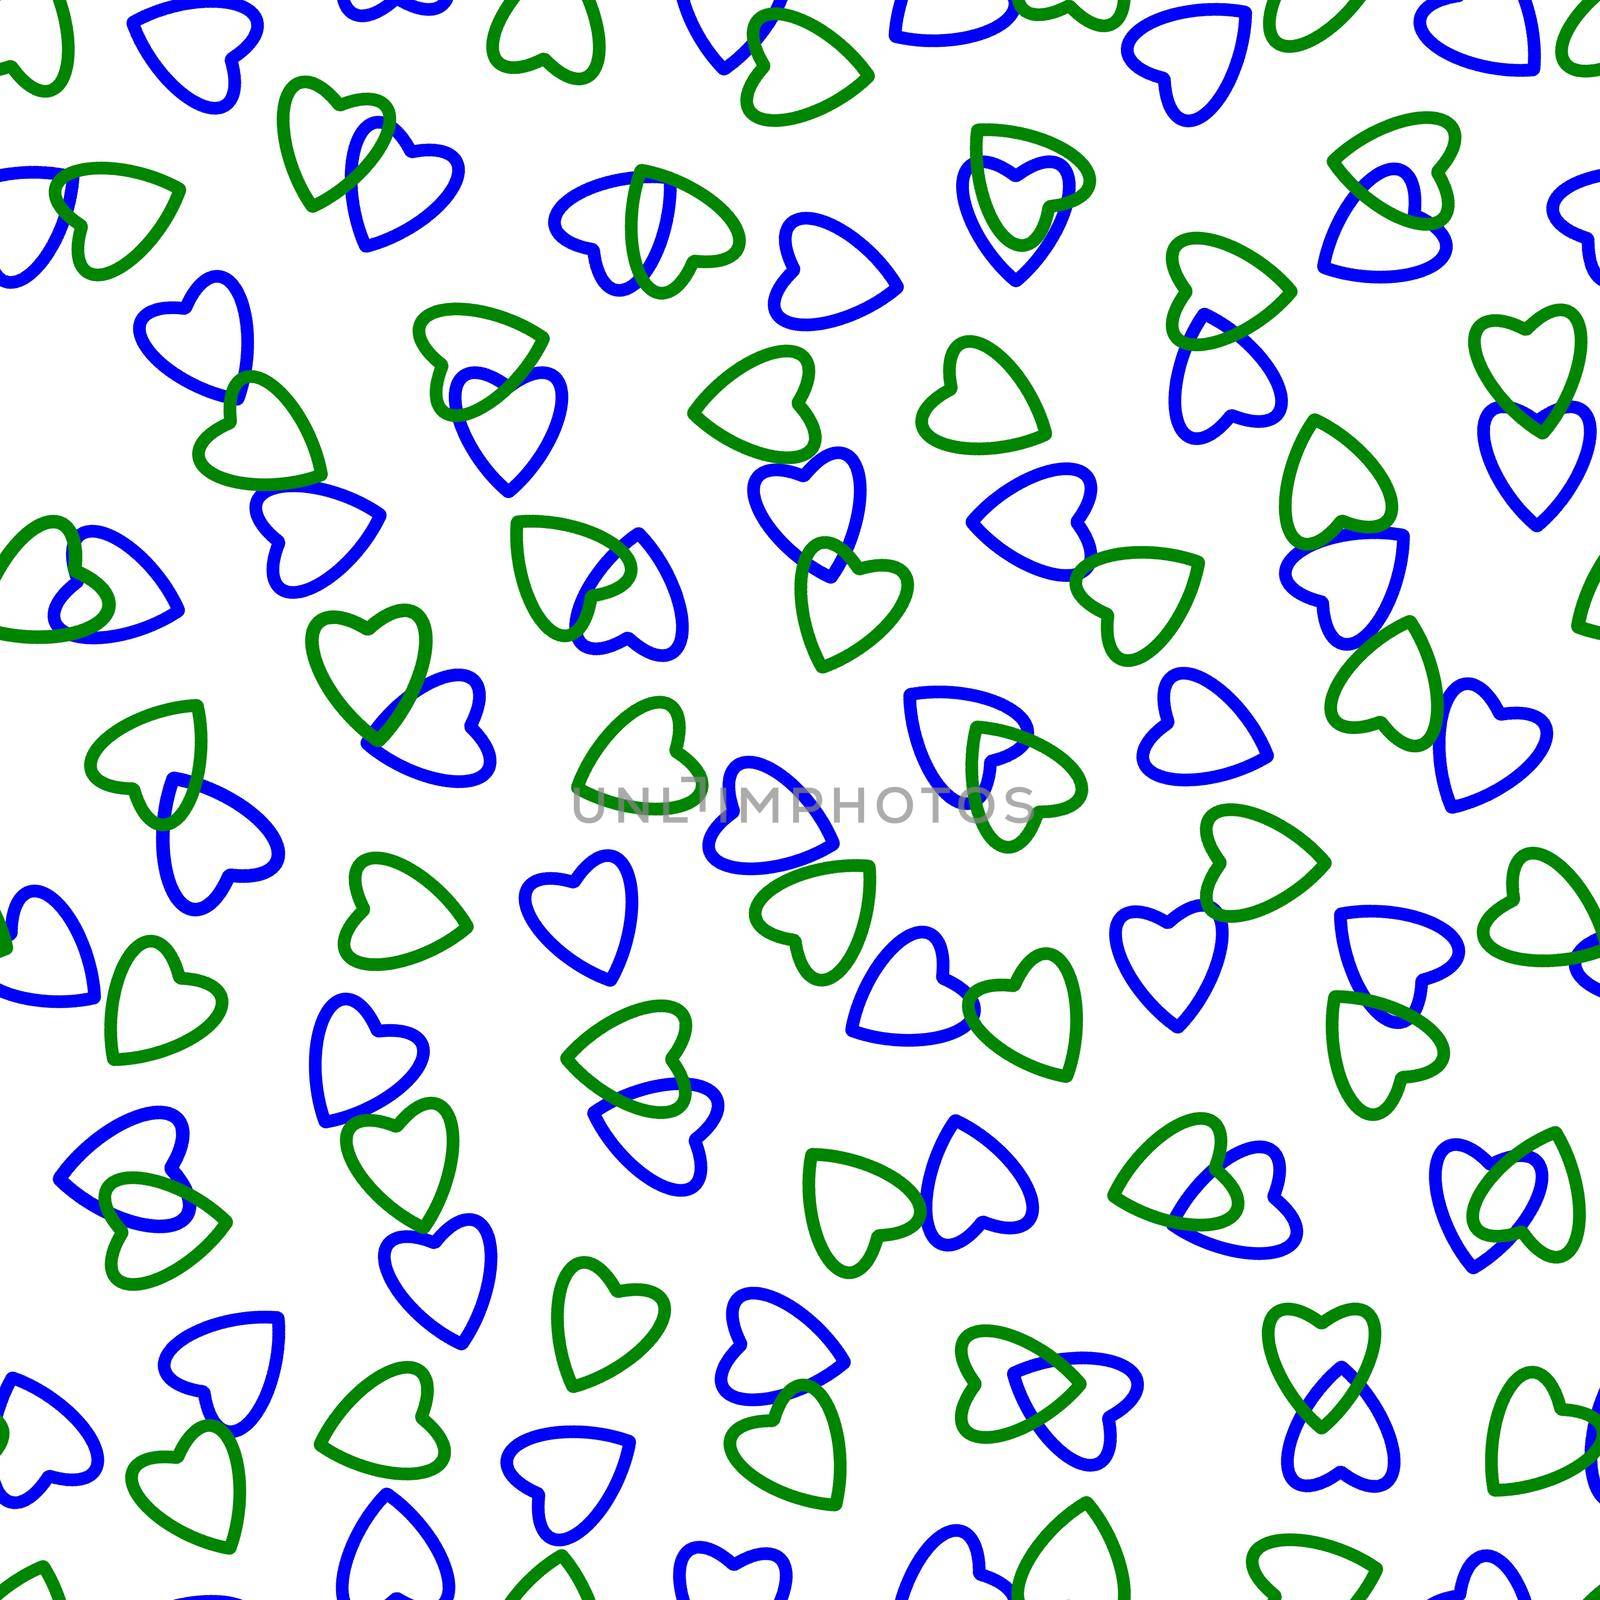 Simple hearts seamless pattern,endless chaotic texture made of tiny heart silhouettes.Valentines,mothers day background.Great for Easter,wedding,scrapbook,gift wrapping paper,textiles.Blue,green,white by Angelsmoon